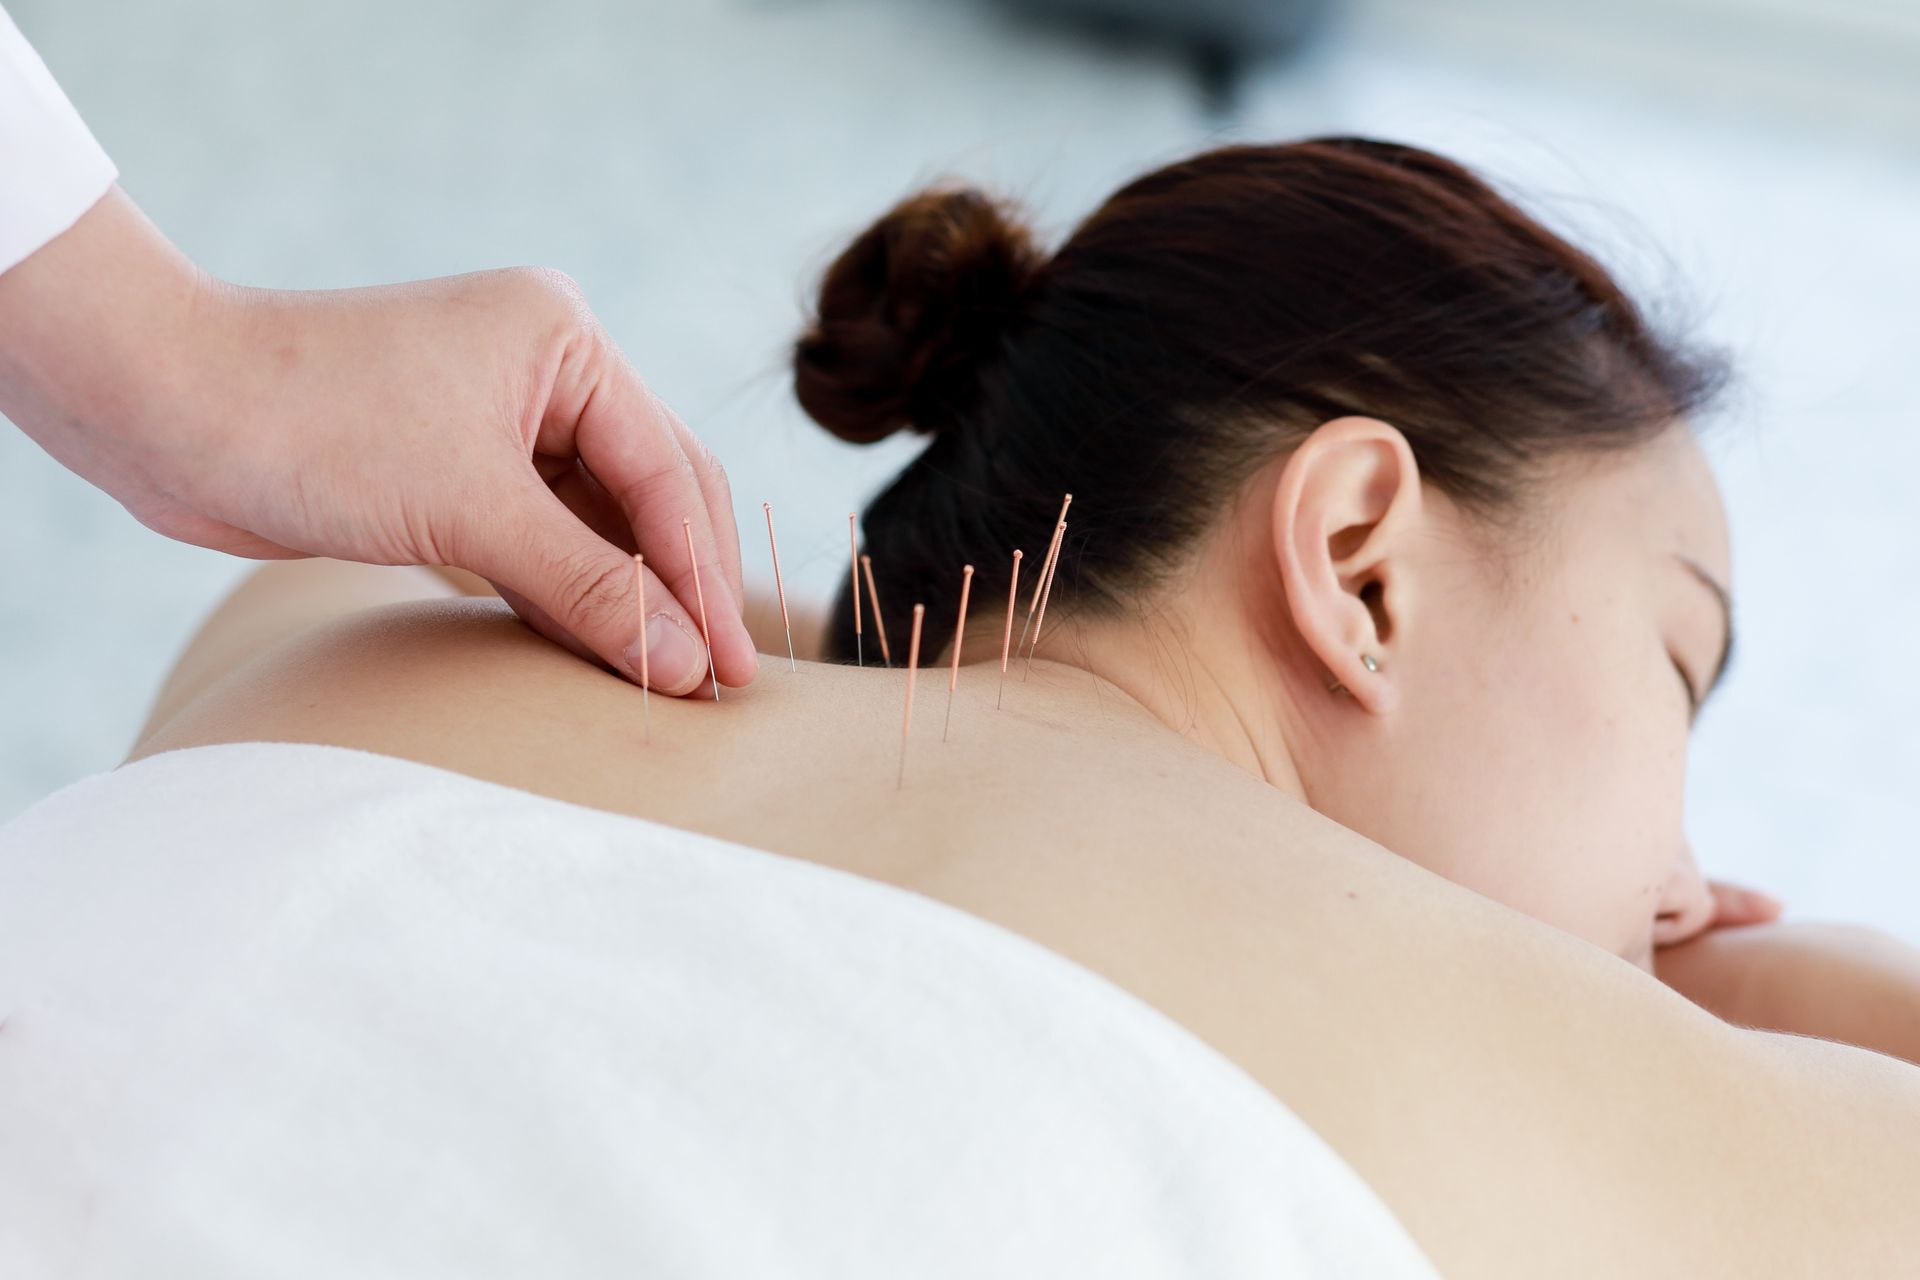 a woman is getting acupuncture on her back